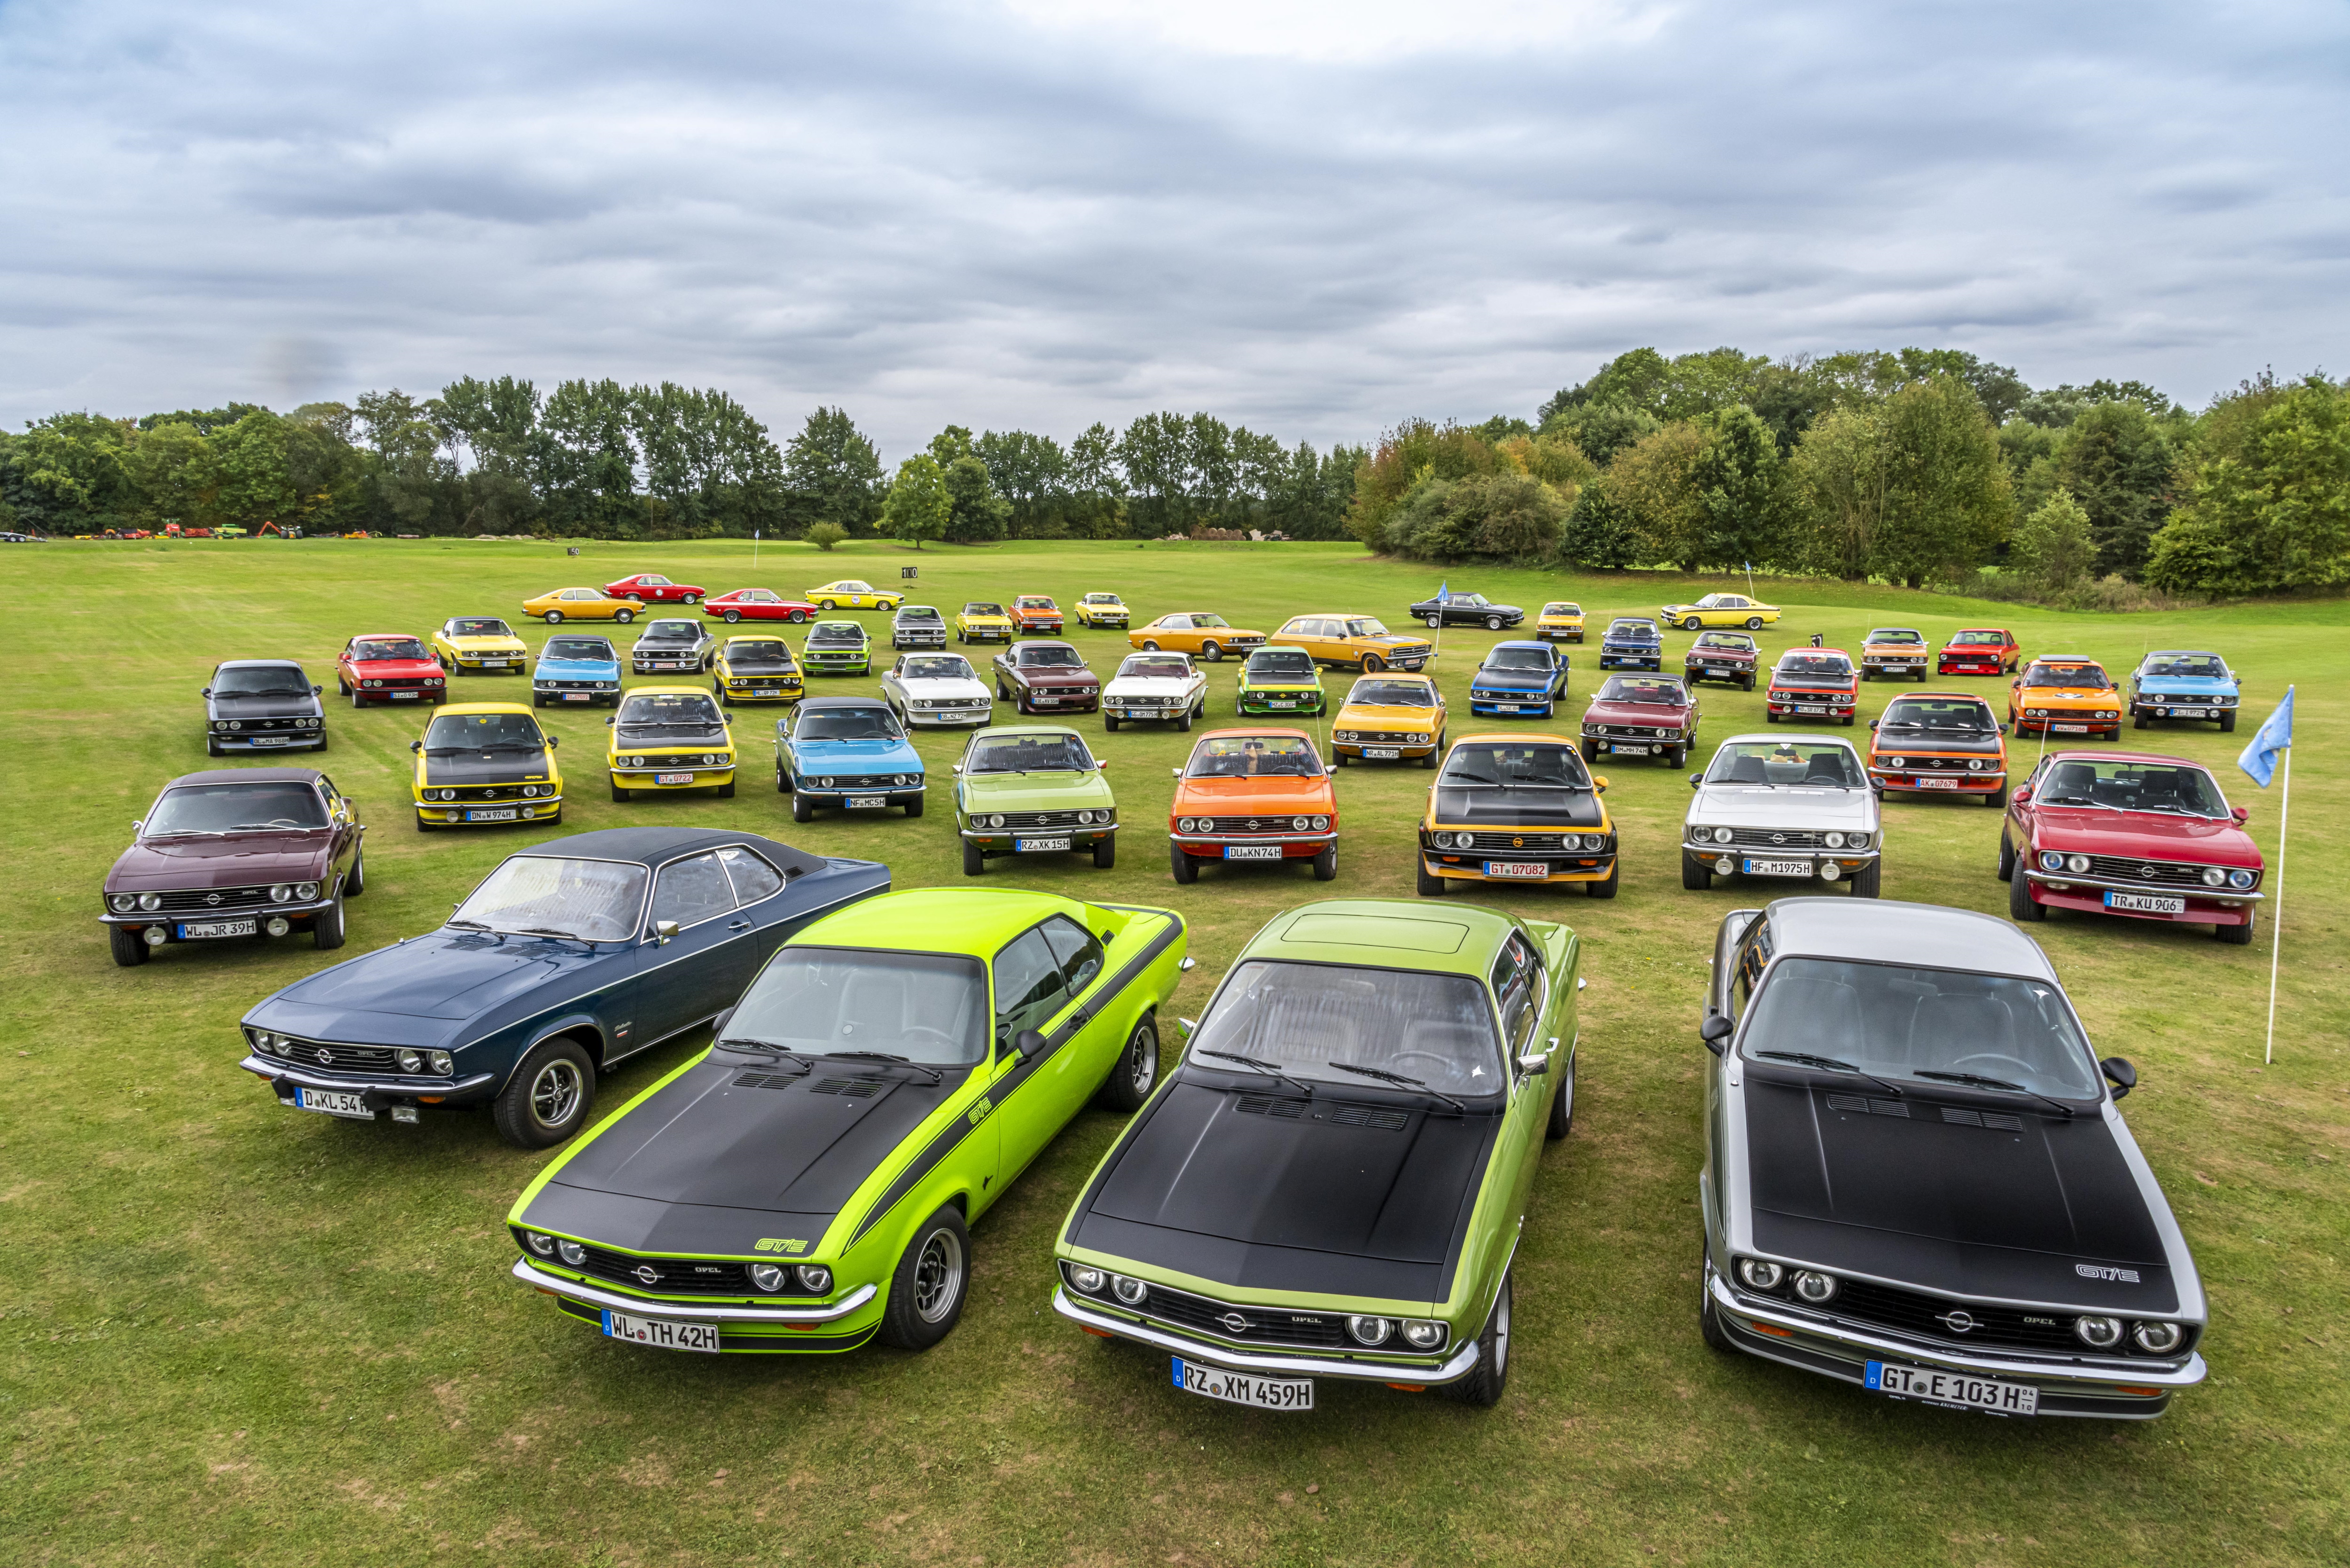 Just like 50 years ago: Opel Manta celebrates at Timmendorfer Strand, Opel  Automobile GmbH, Story - lifePR